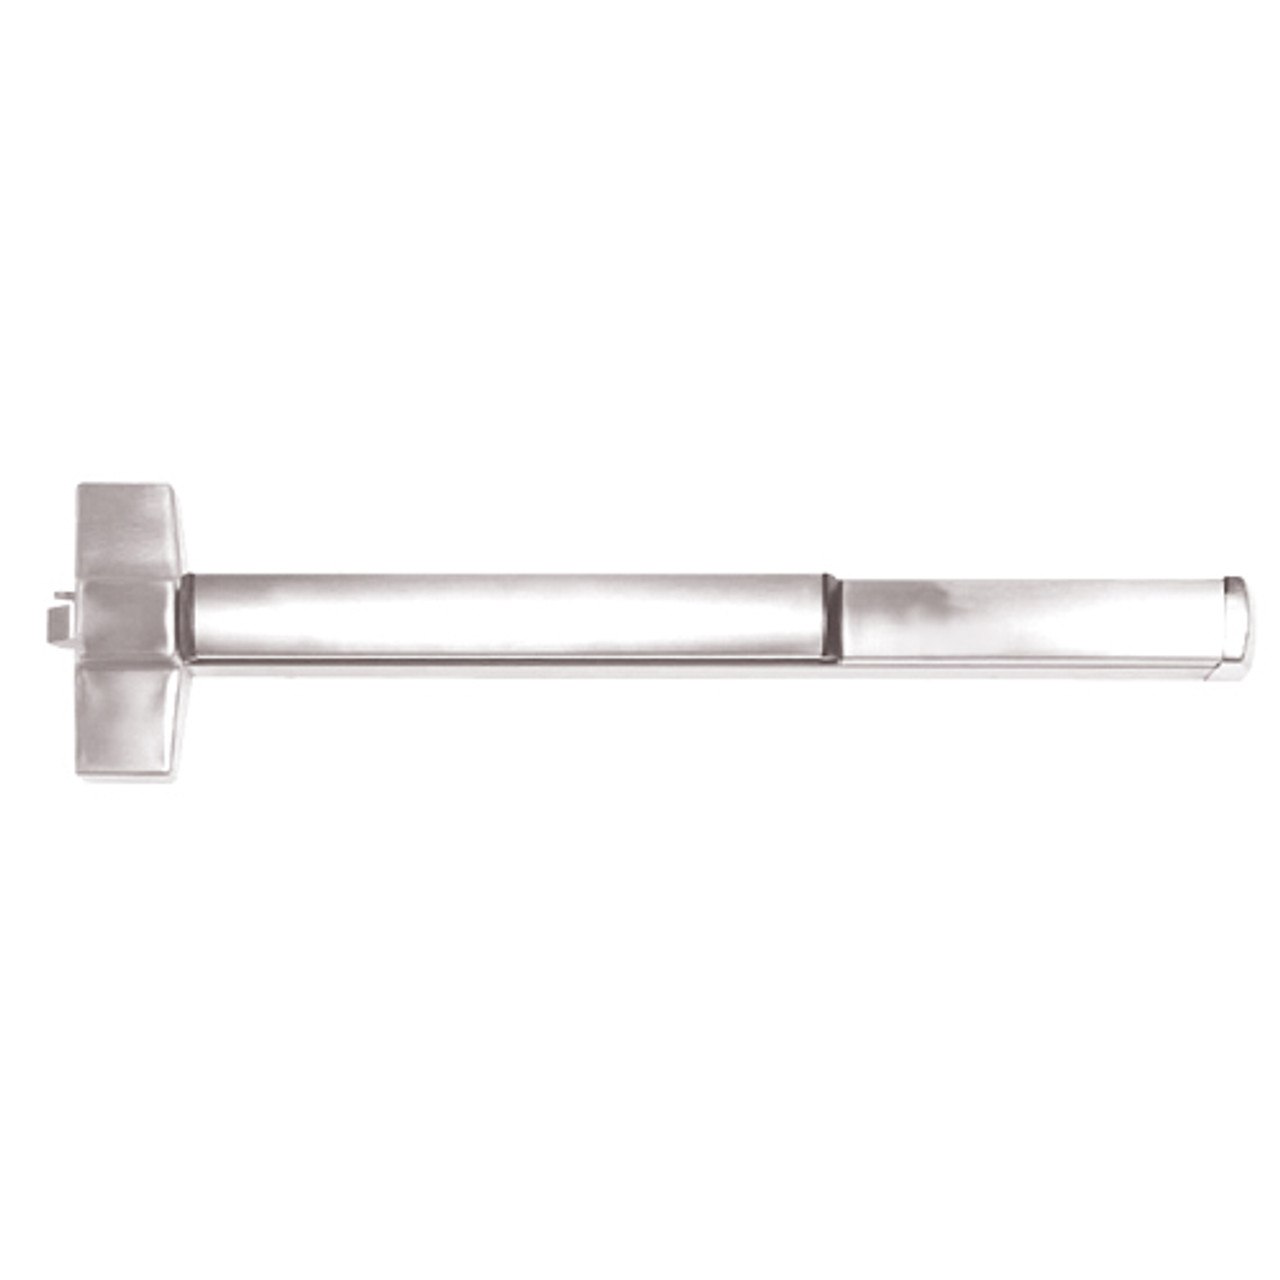 ED5200A-629-W048 Corbin ED5200 Series Fire Rated Rim Exit Device in Bright Stainless Steel Finish